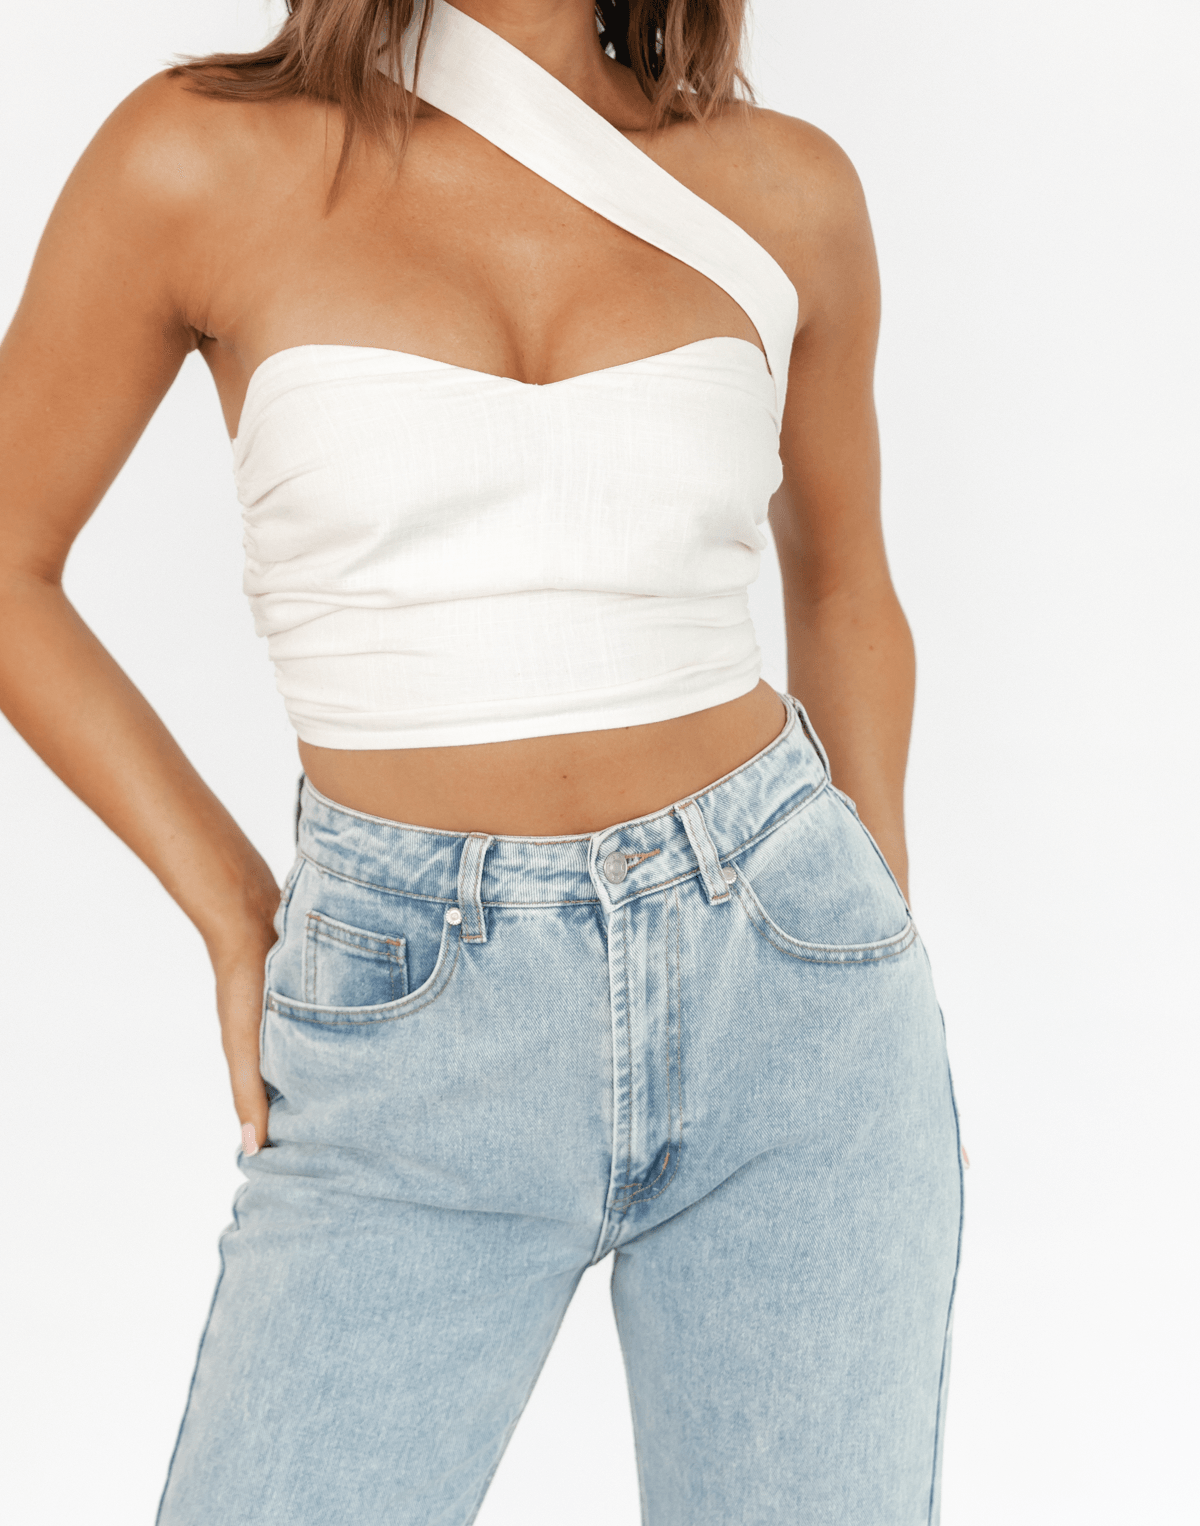 Alani Top (White) - White Gathered Crop Top - Women's Top - Charcoal Clothing